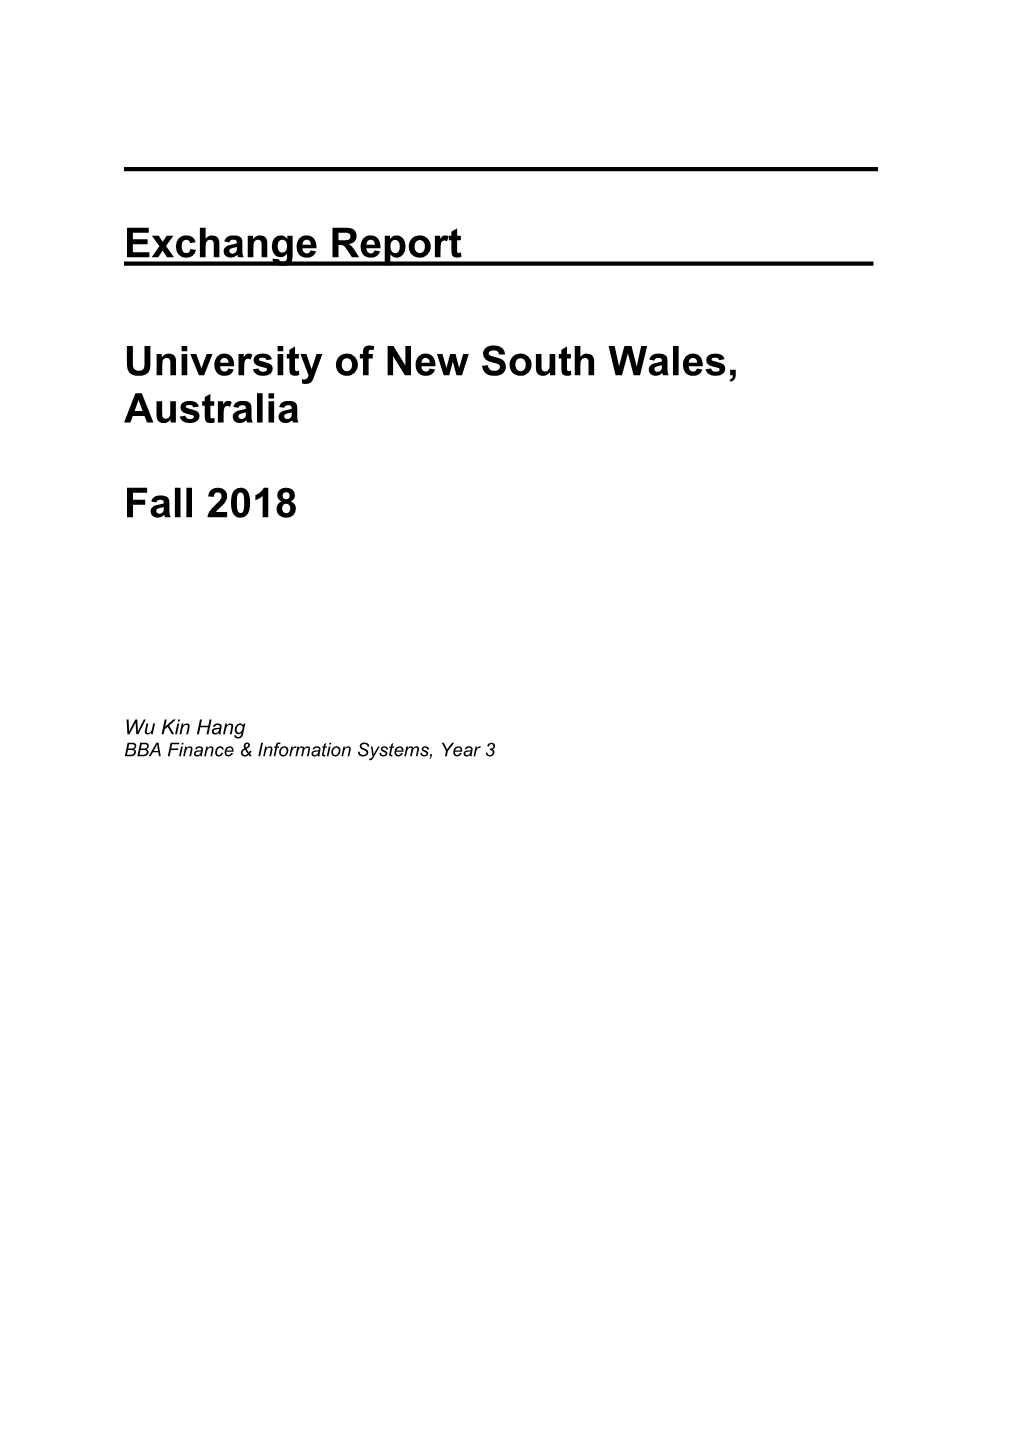 Exchange Report University of New South Wales, Australia Fall 2018